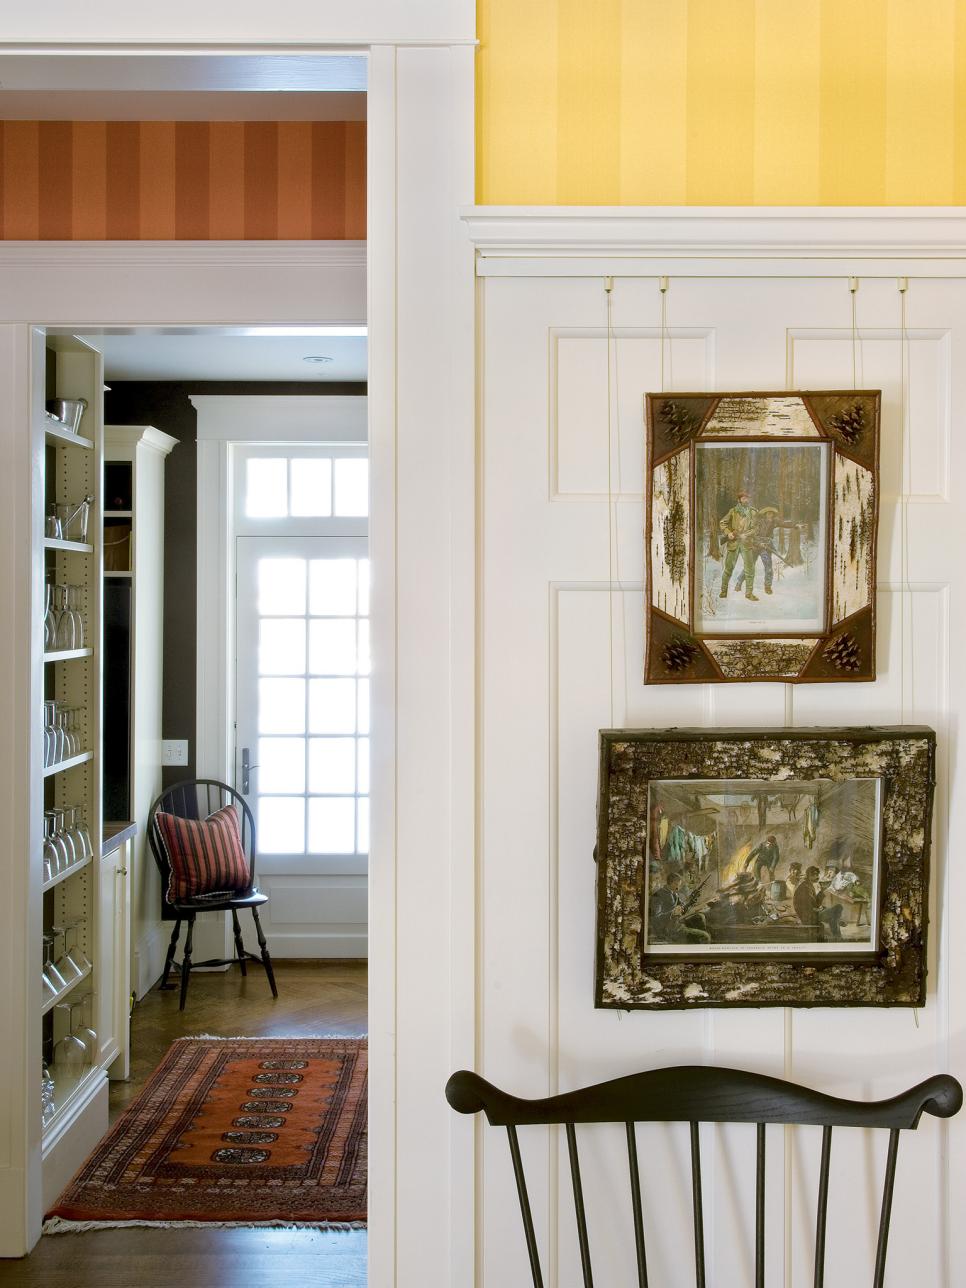 Traditional Entryway Features Striped Wallpaper & White Paneling | HGTV